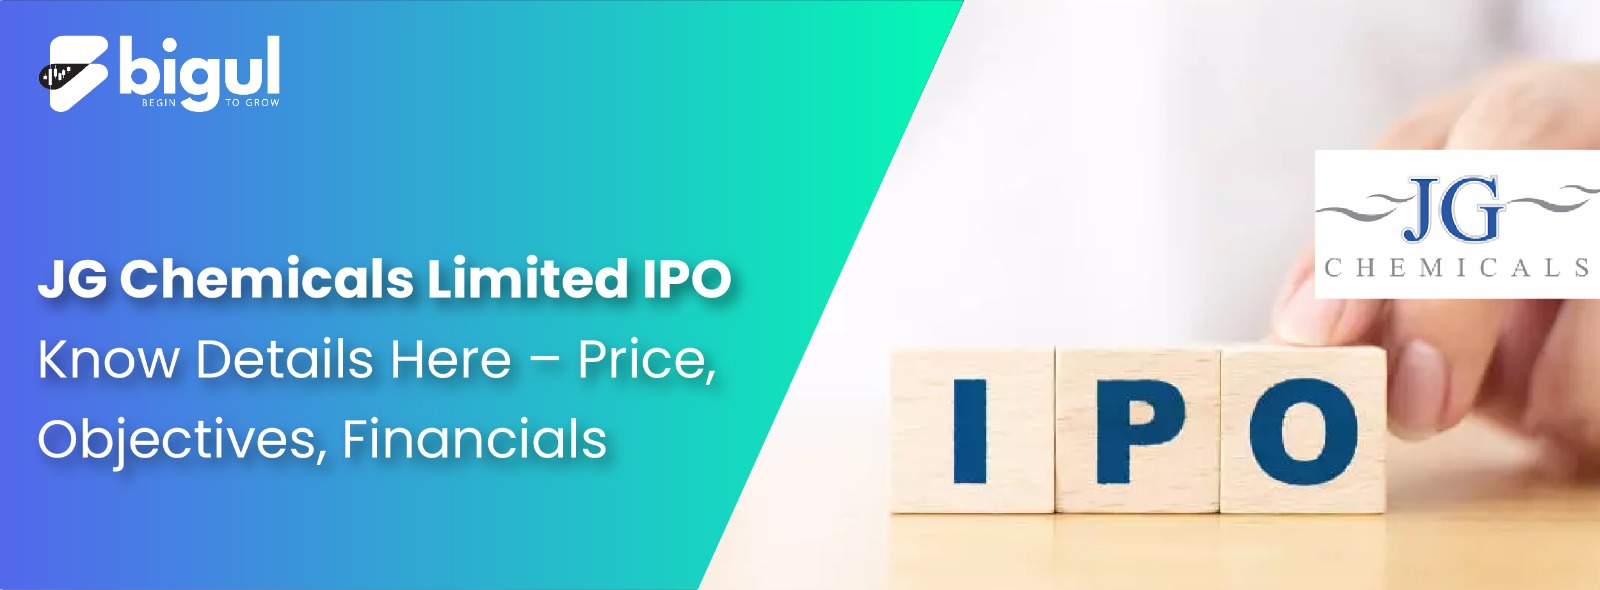 JG Chemicals Limited IPO: Know Details Here – Price, Objectives, Financials